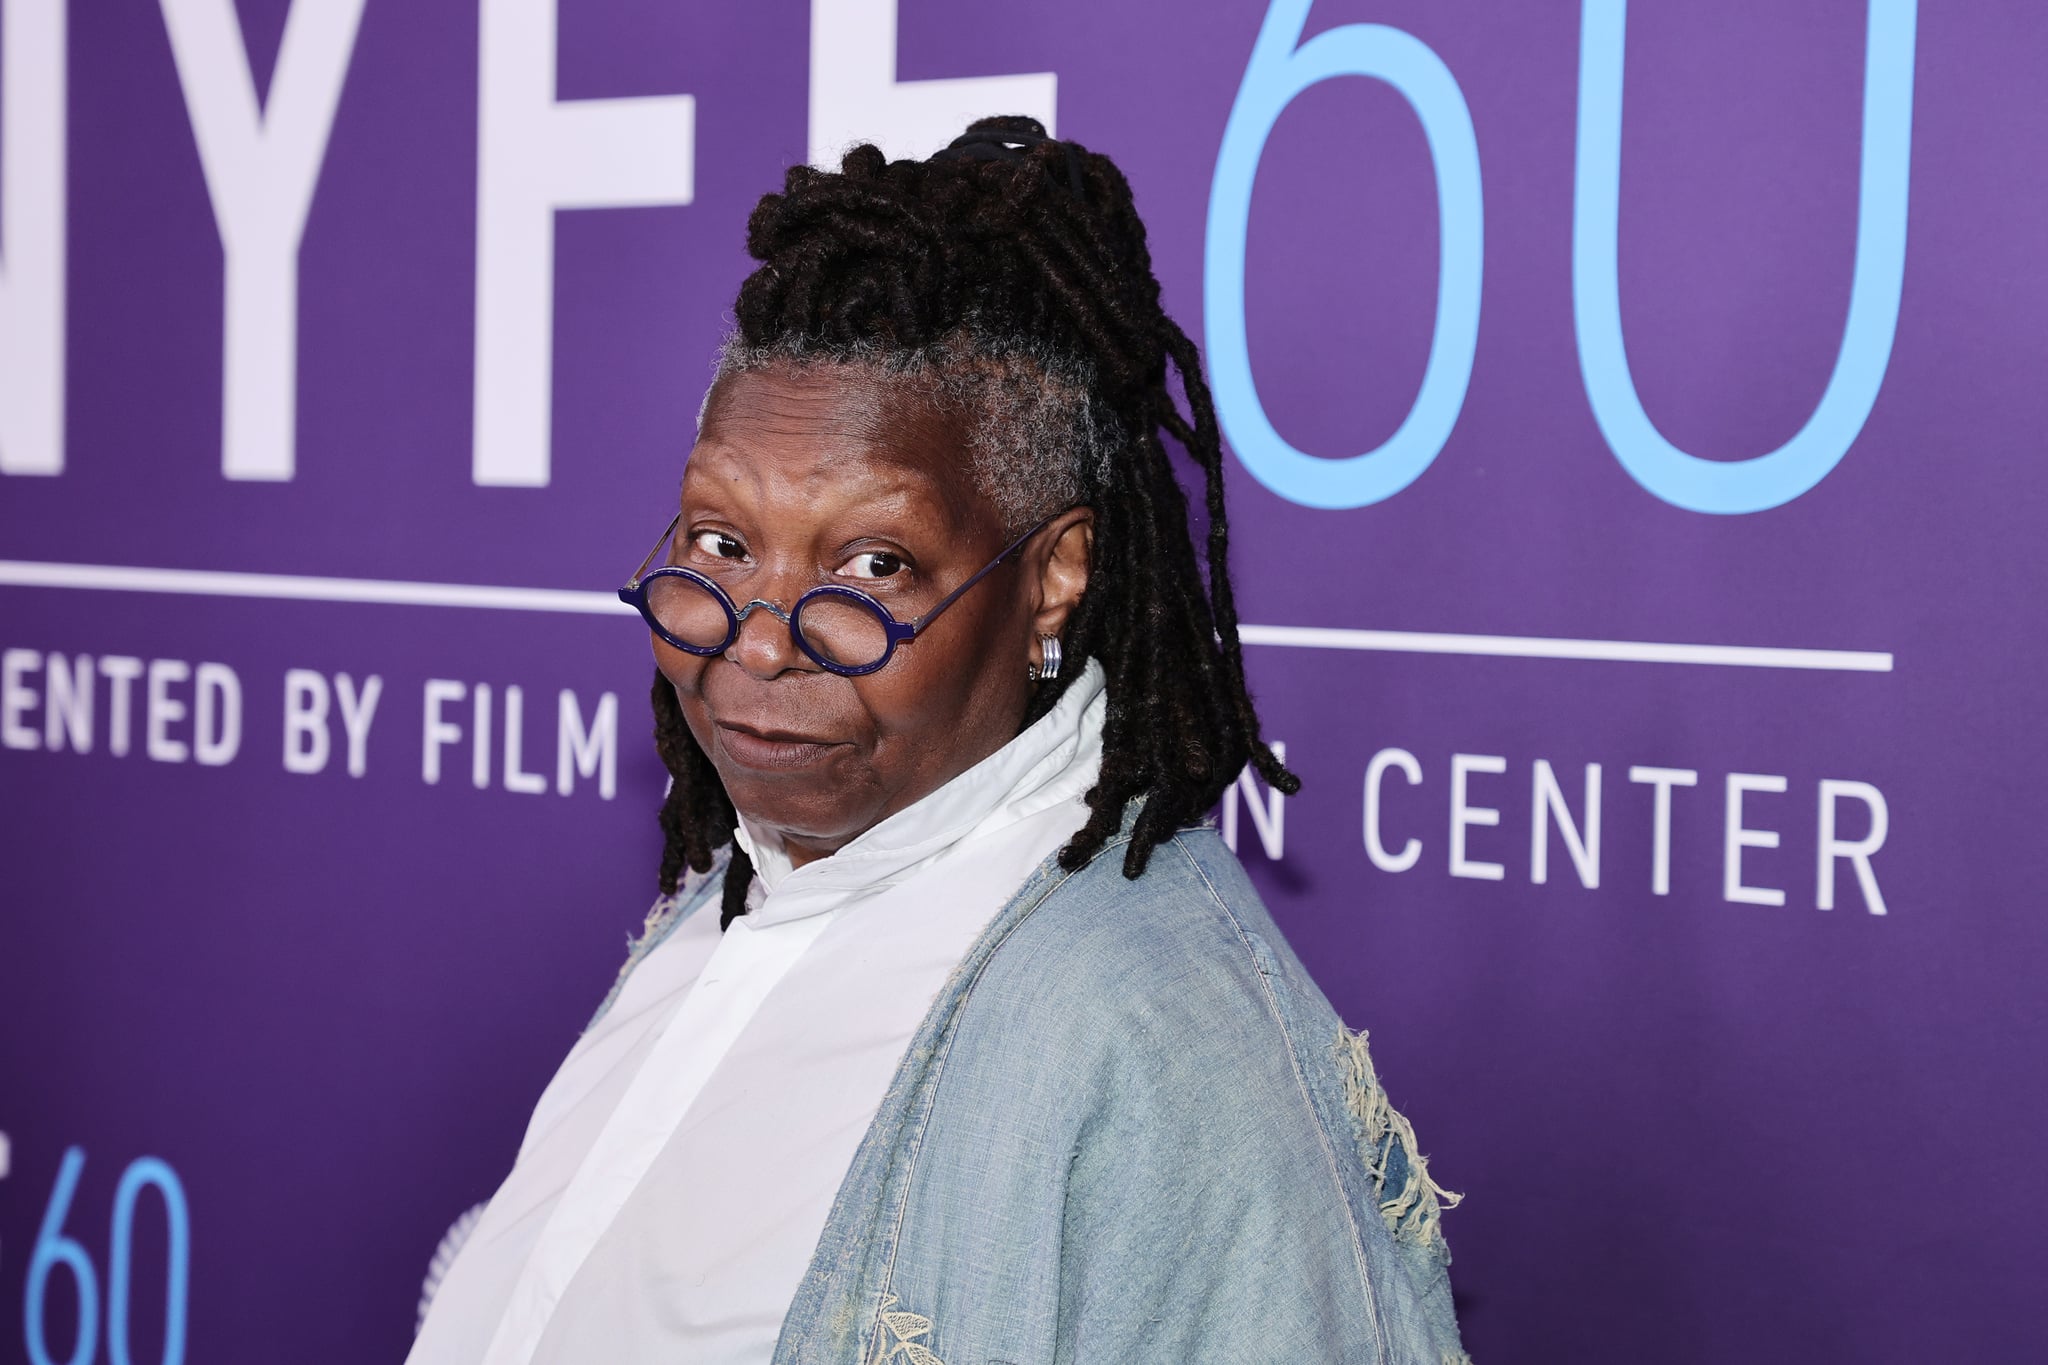 NEW YORK, NEW YORK - OCTOBER 01: Whoopi Goldberg attends the premiere of 